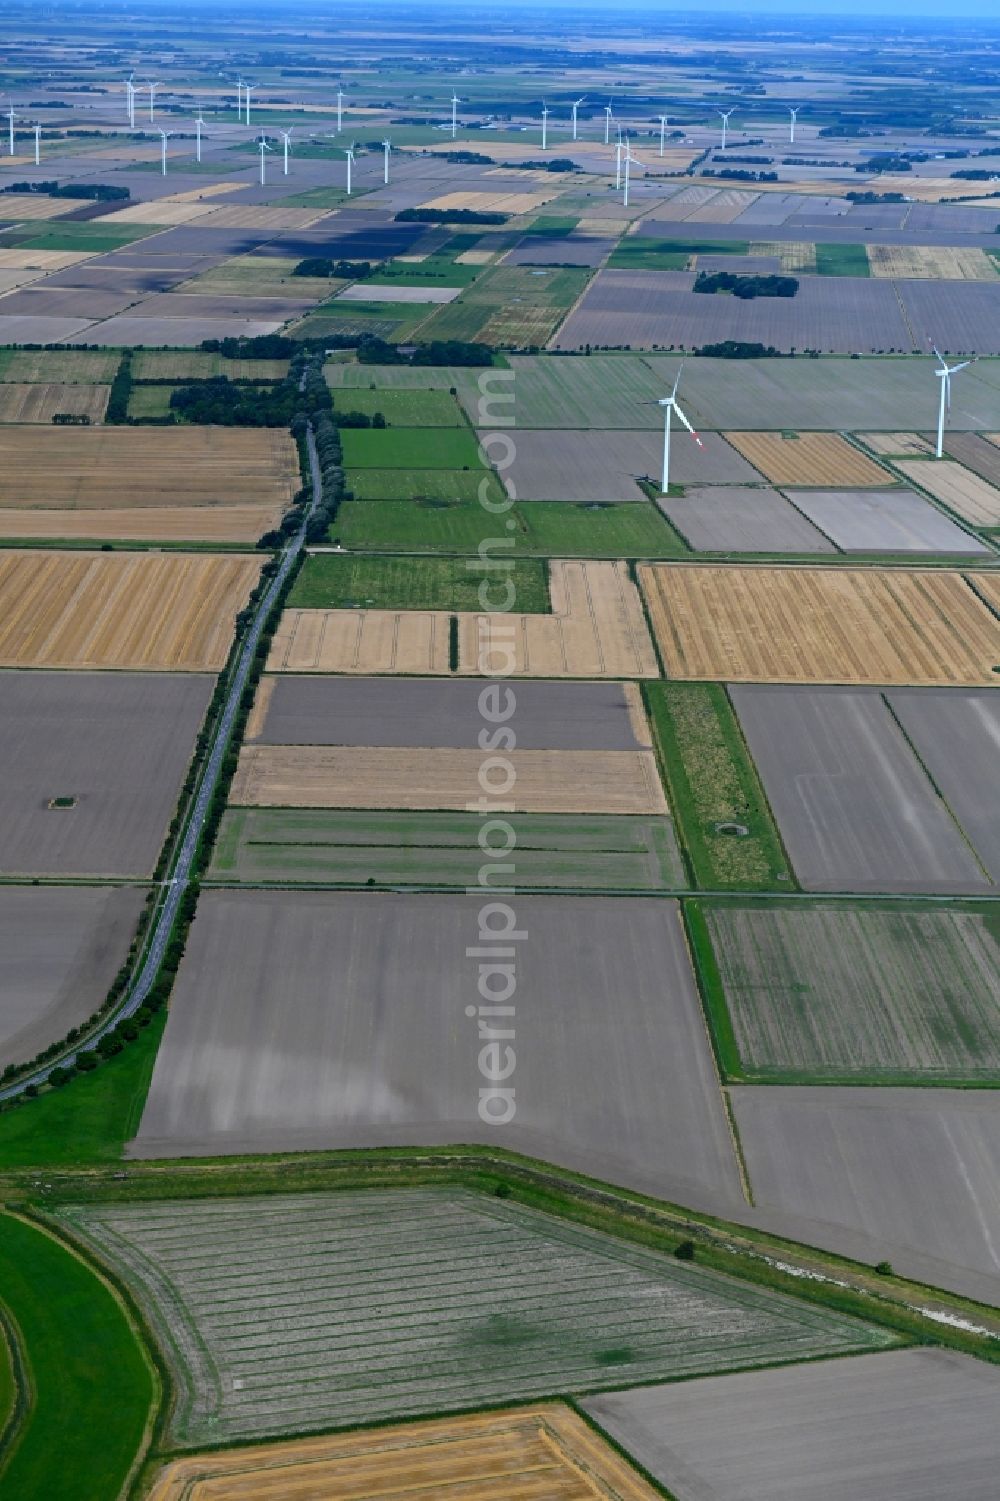 Dagebüll from the bird's eye view: Structures on agricultural fields in Dagebuell in the state Schleswig-Holstein, Germany